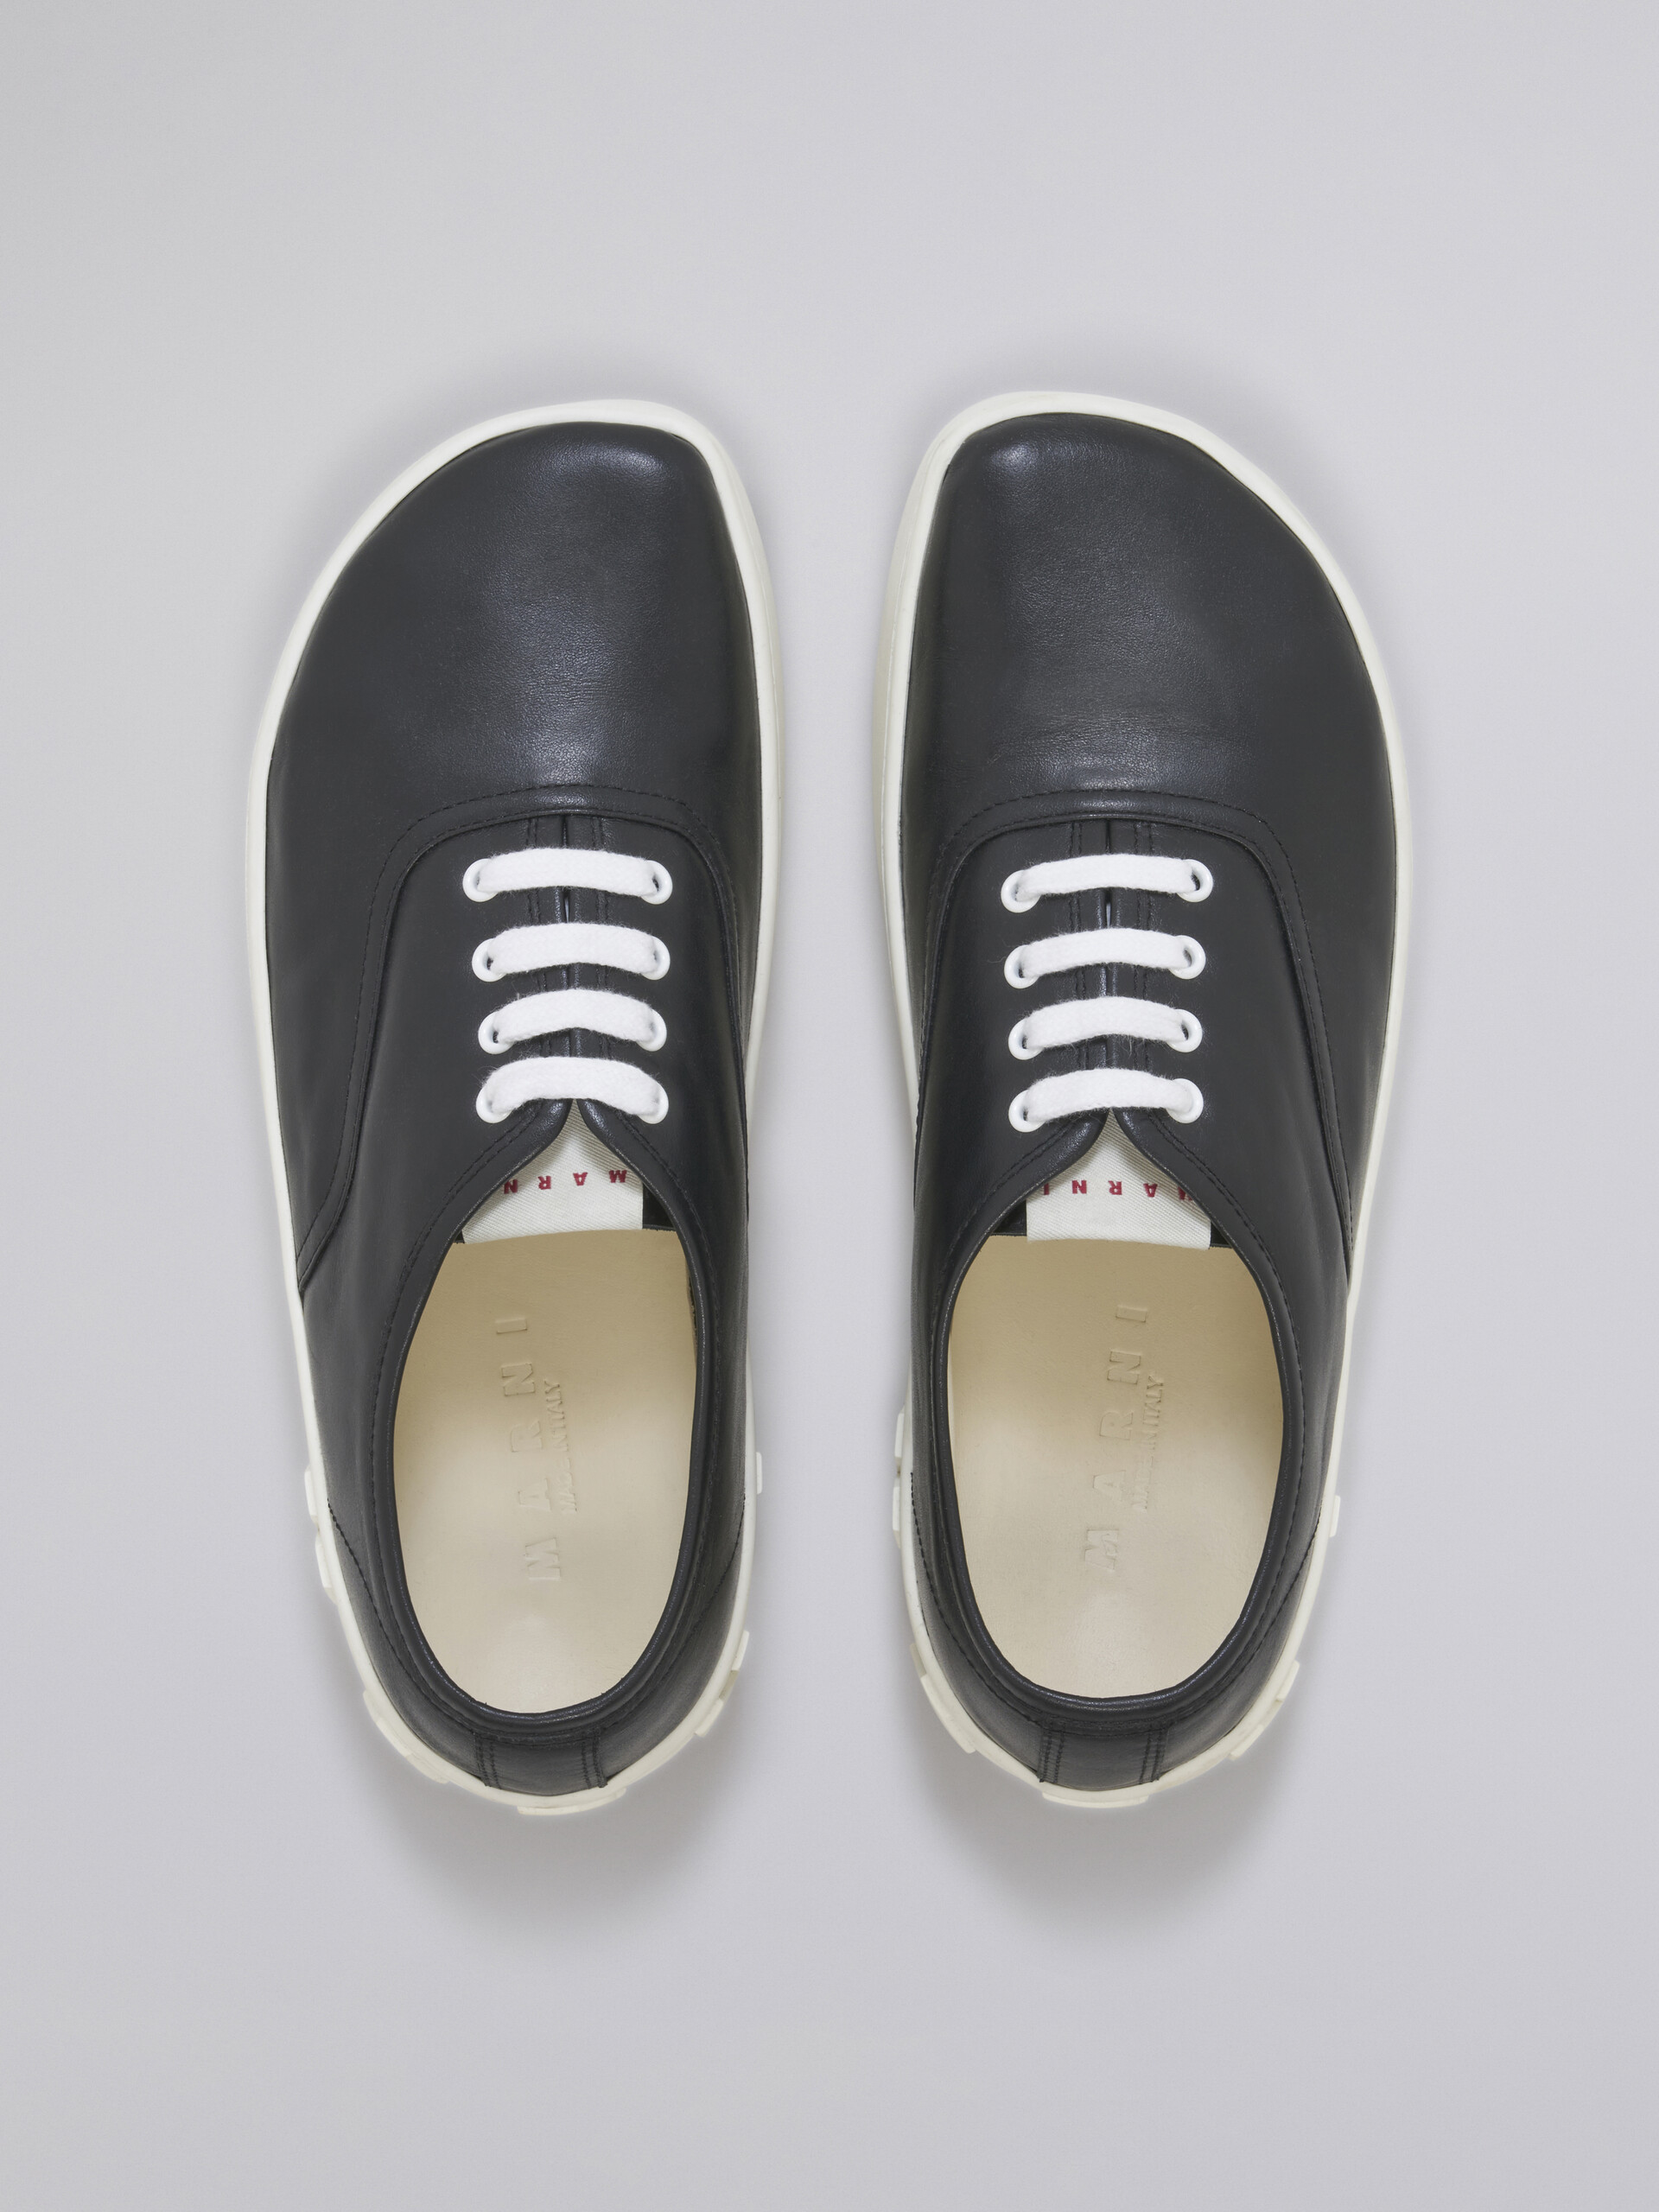 Black leather sneaker with maxi logo - Sneakers - Image 4